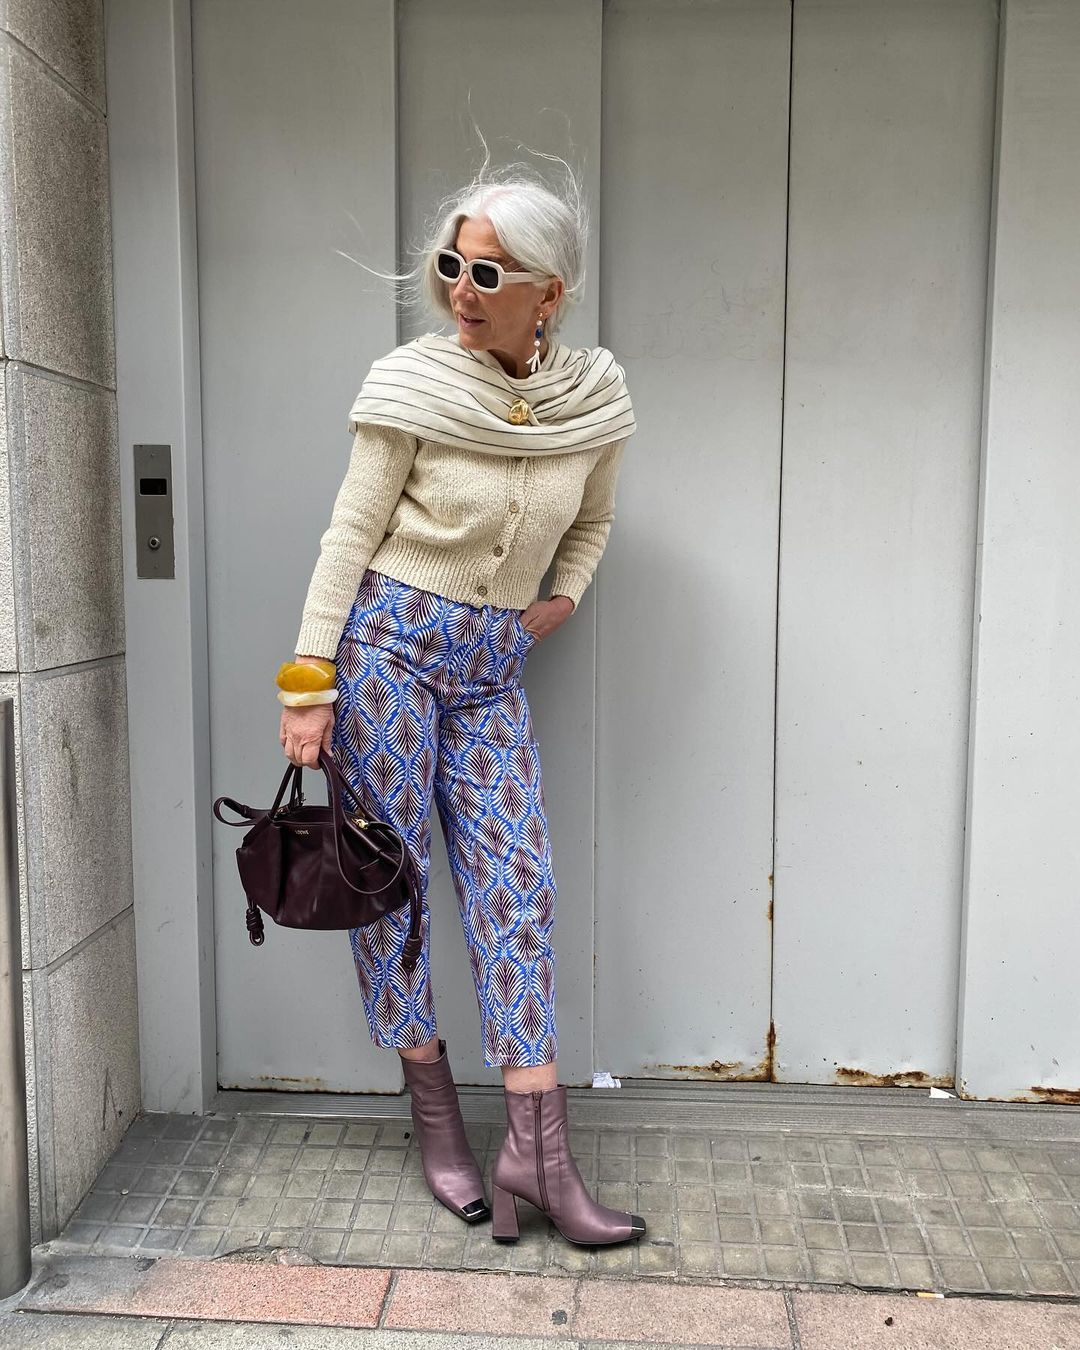 27 Fall Outfits for 60-Year-Old Women: Stylish and Comfortable Ideas